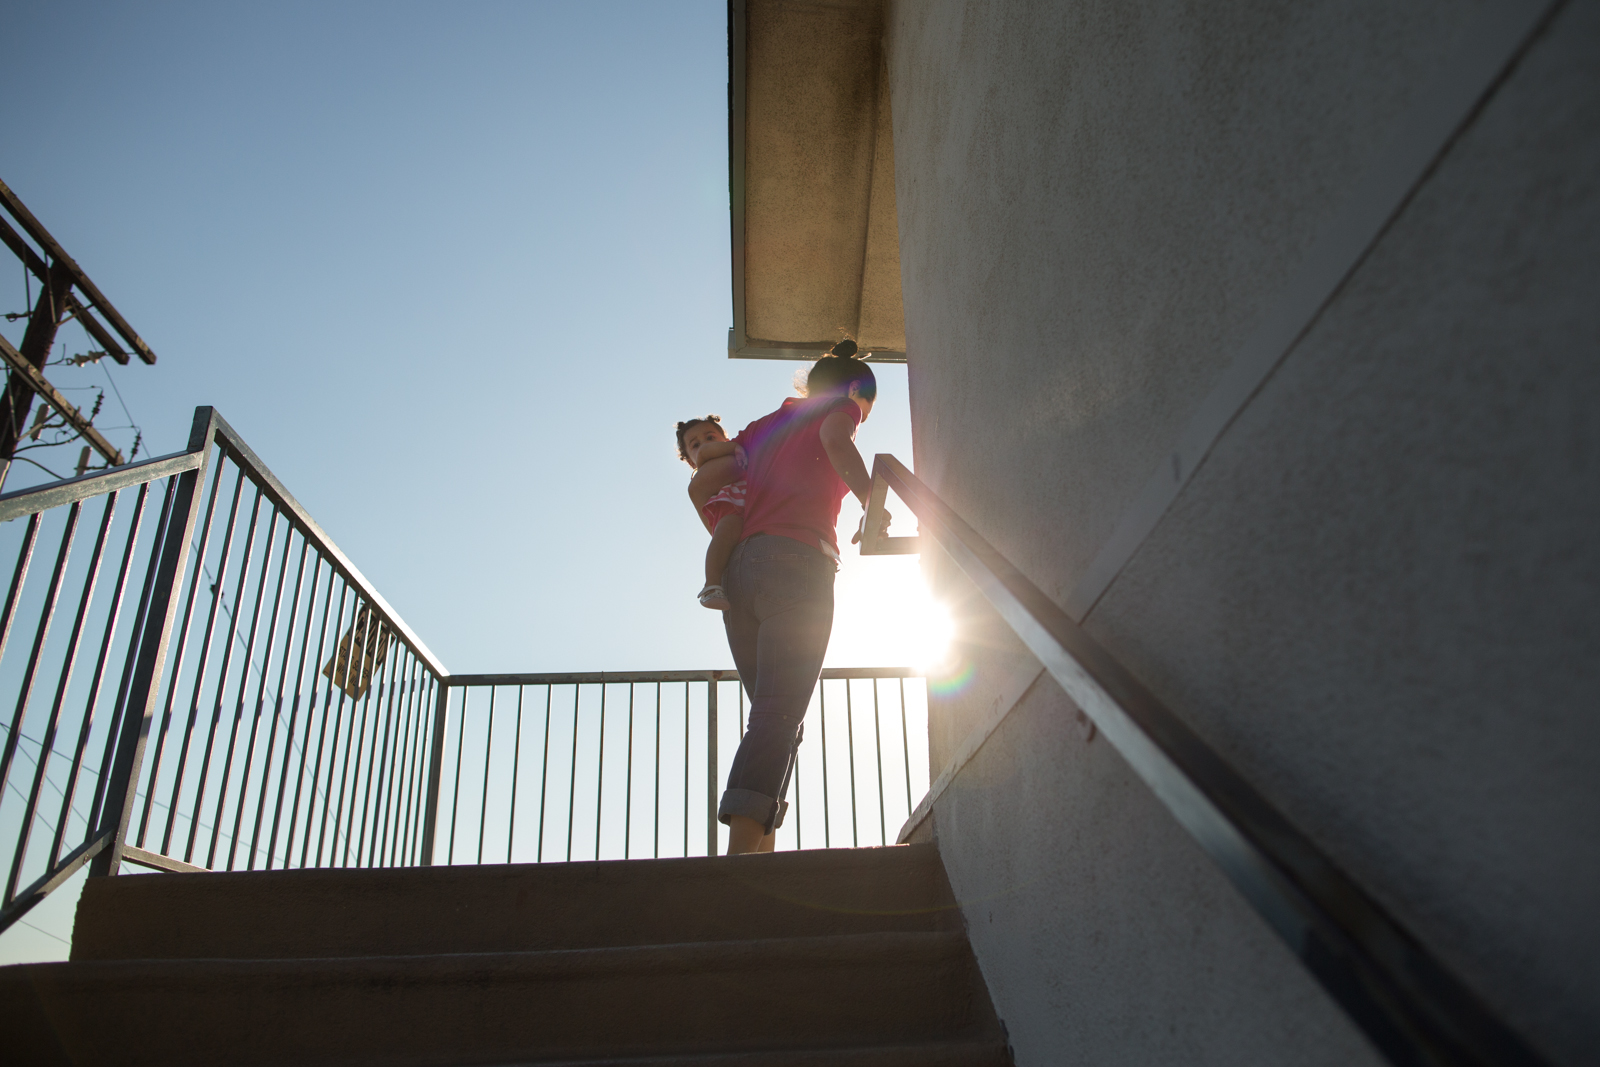 Christina Bray walks up stairs at the Community Prisoner Mother Program in Pomona, Calif. with her daughter Lola. Bray is serving time for stealing over $1 million dollars from an elderly client of JP Morgan Chase bank in San Jose, where she worked as a manager.